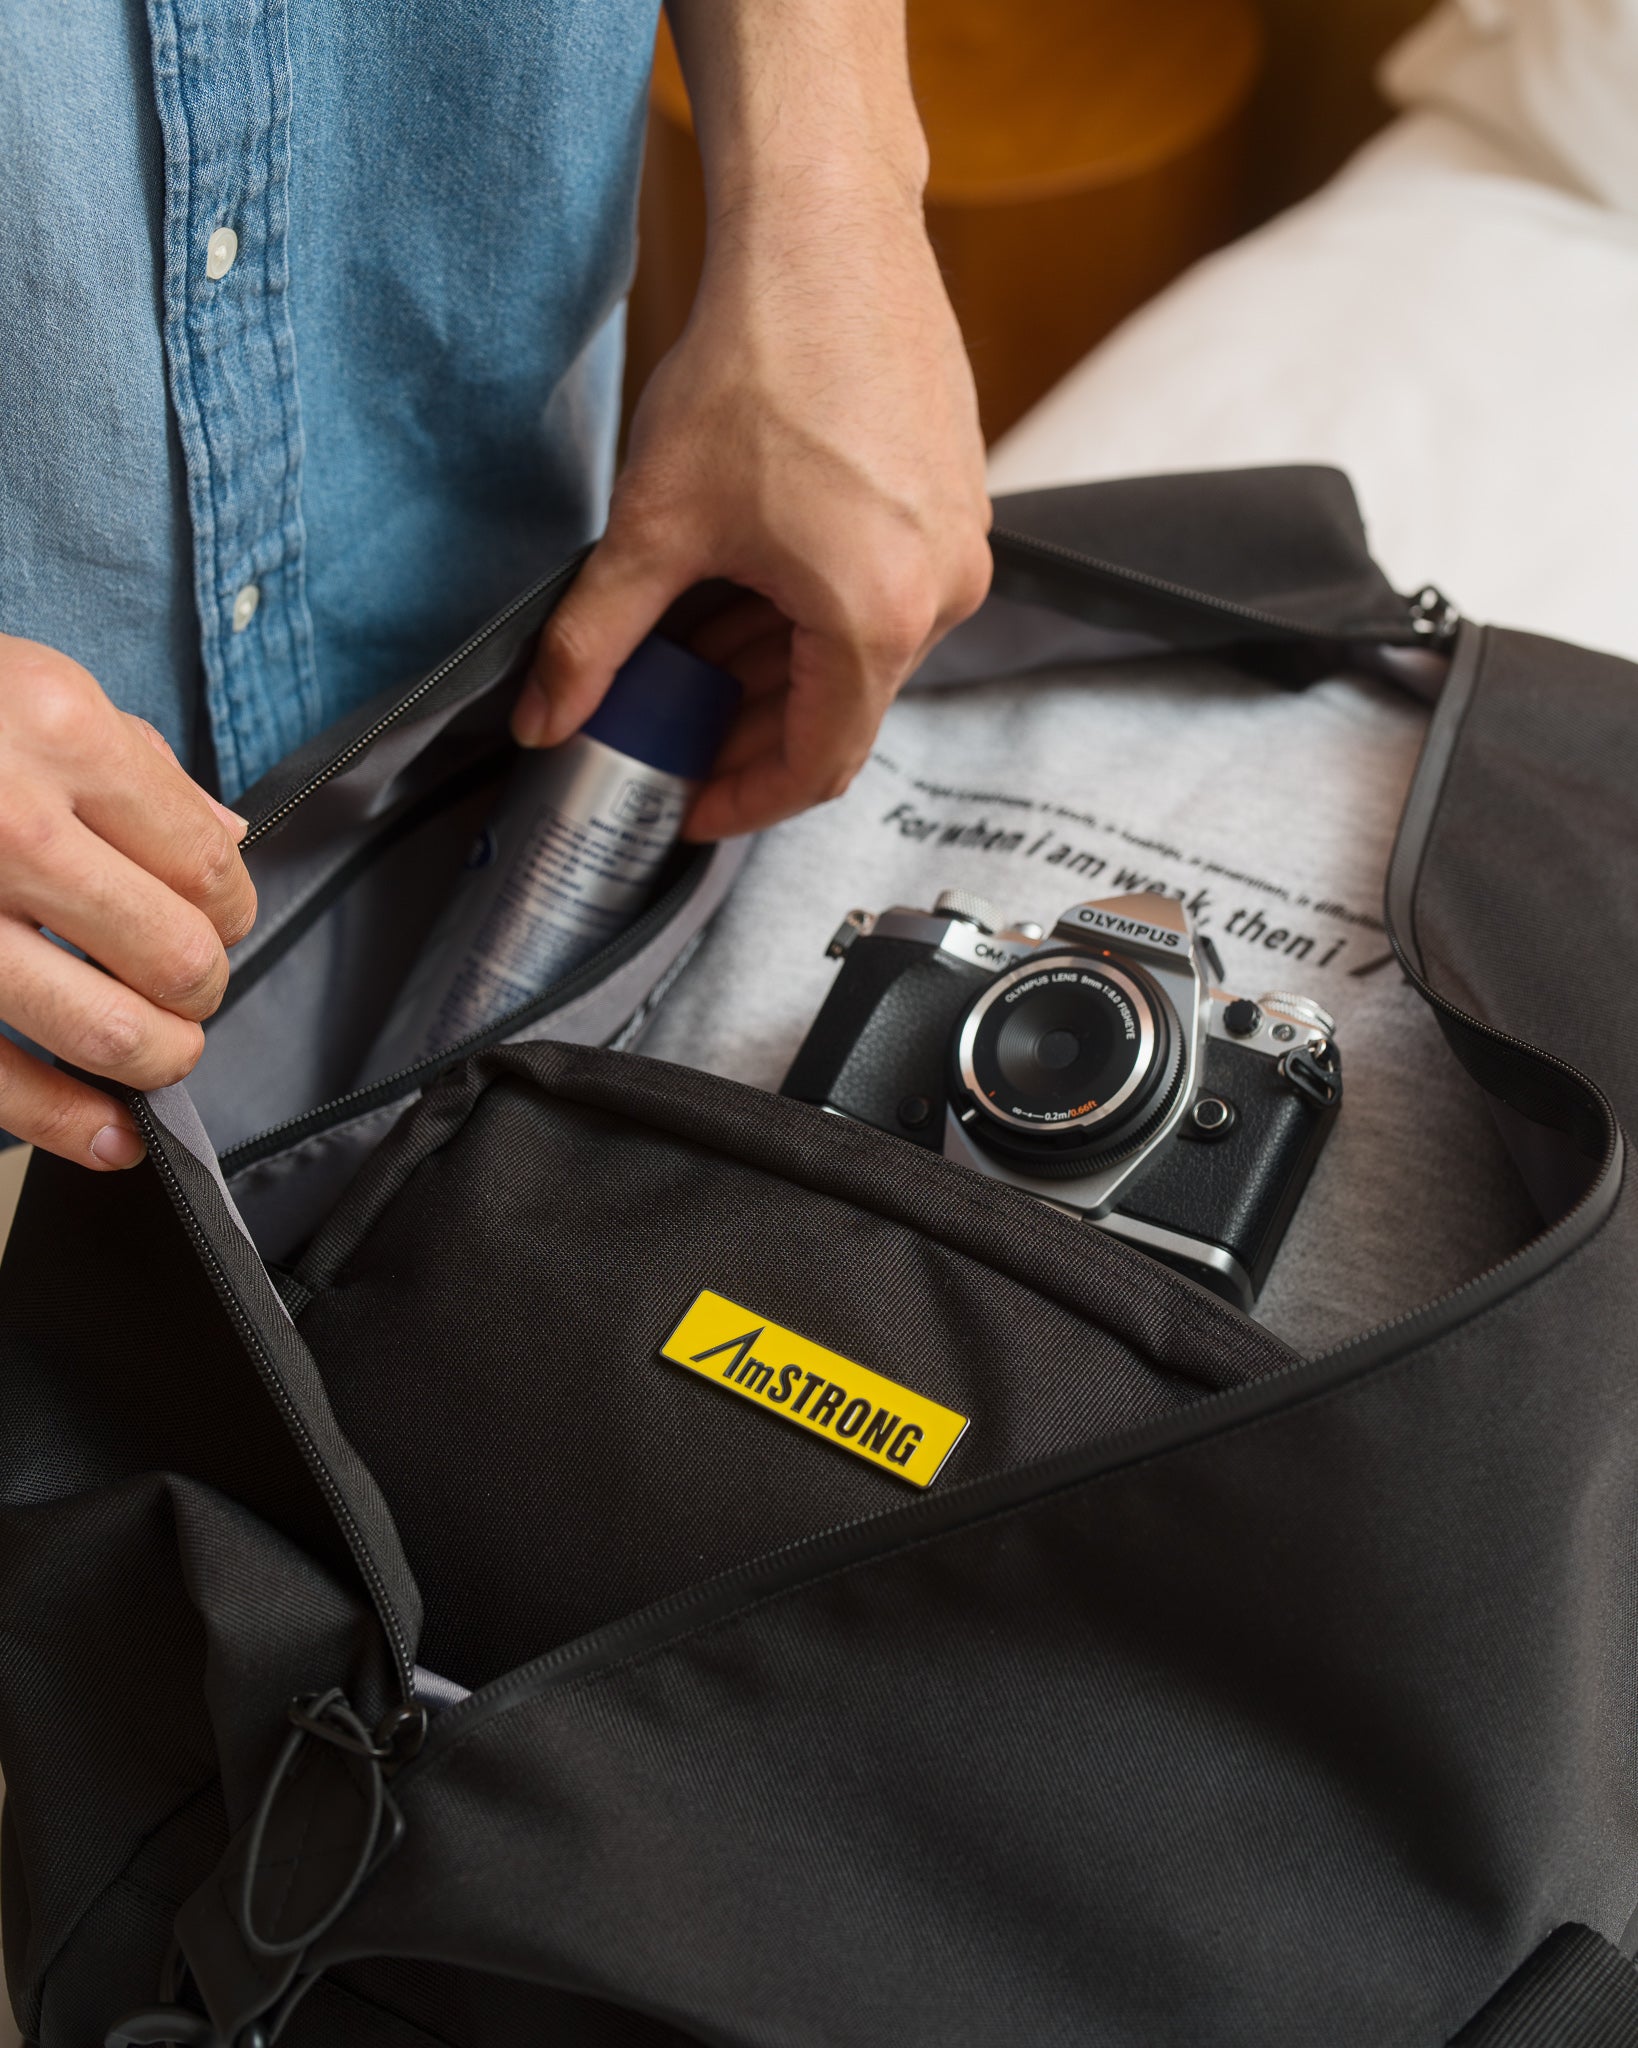 AmSTRONG Blog| An Easy Guide To Finding Your Ideal Travel Bag